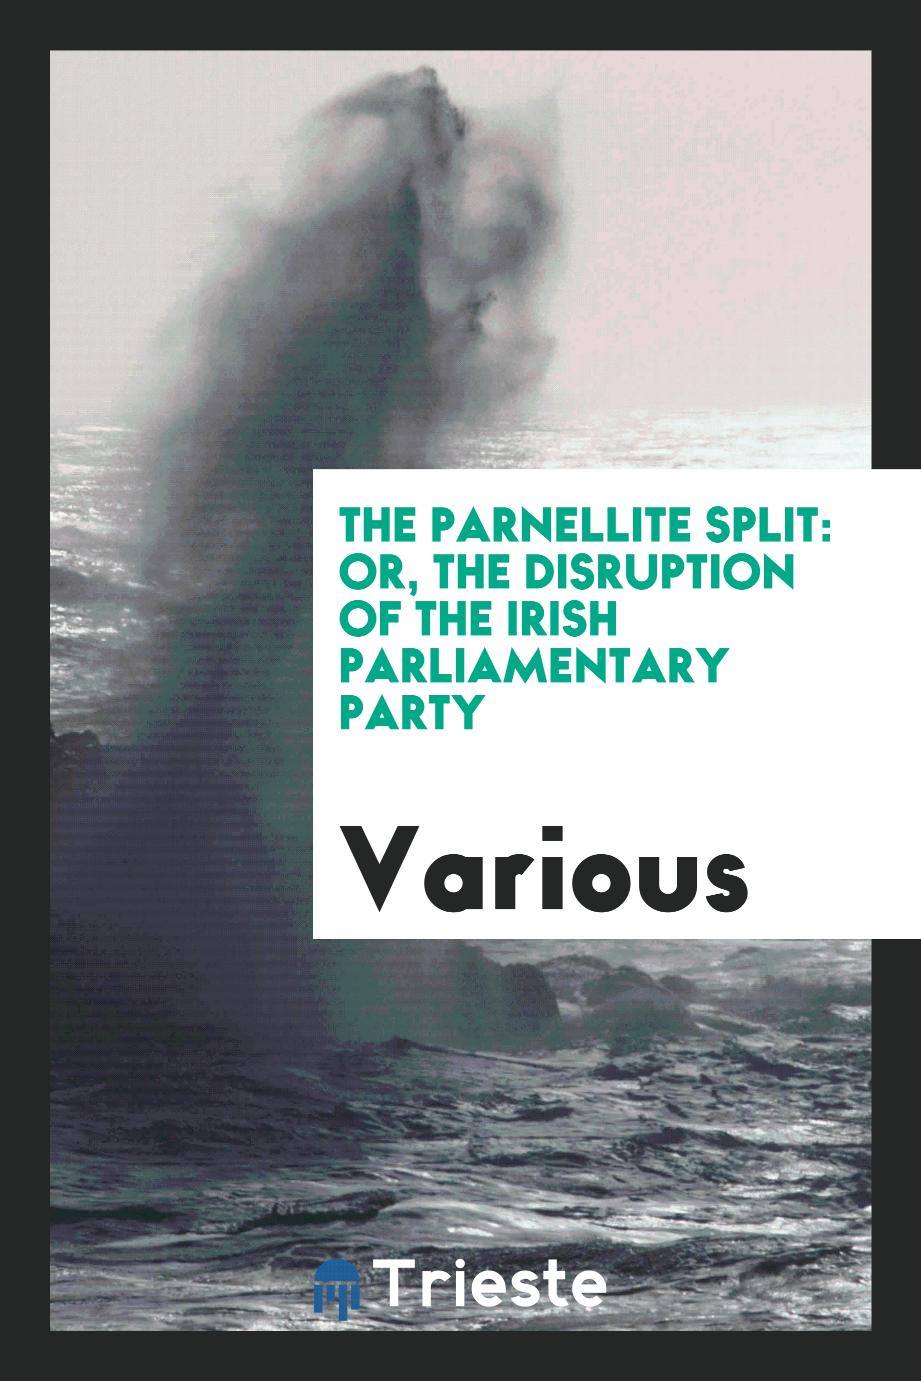 The Parnellite split: or, the disruption of the Irish Parliamentary Party